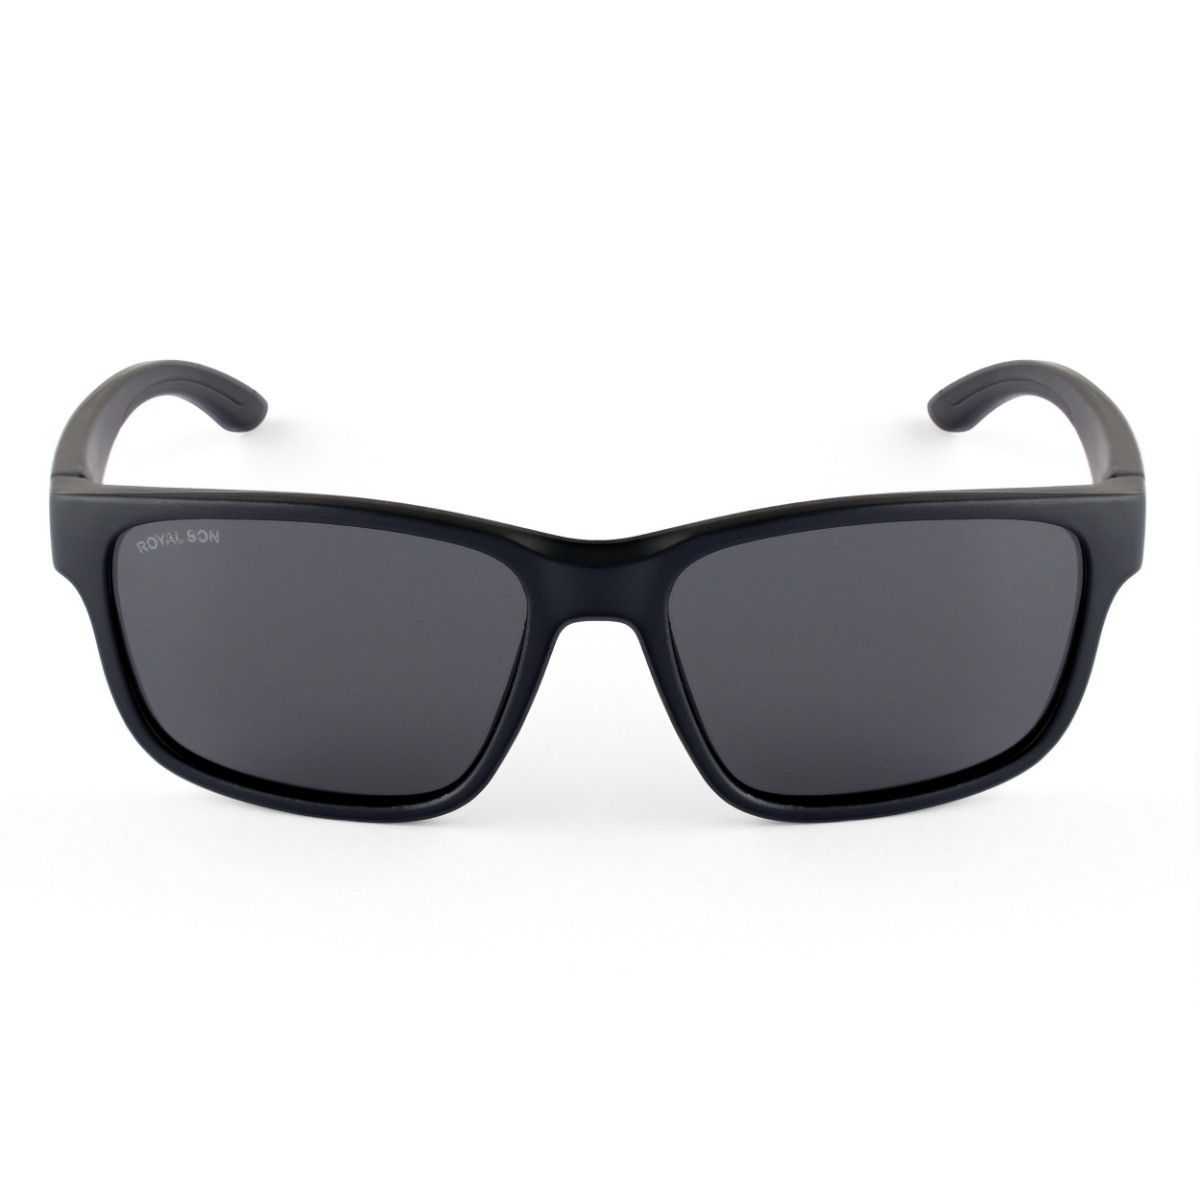 Buy Vaanions Men's and Women's Polarized Rectangular Vintage Driving  Sunglasses (Matte Black) at Amazon.in